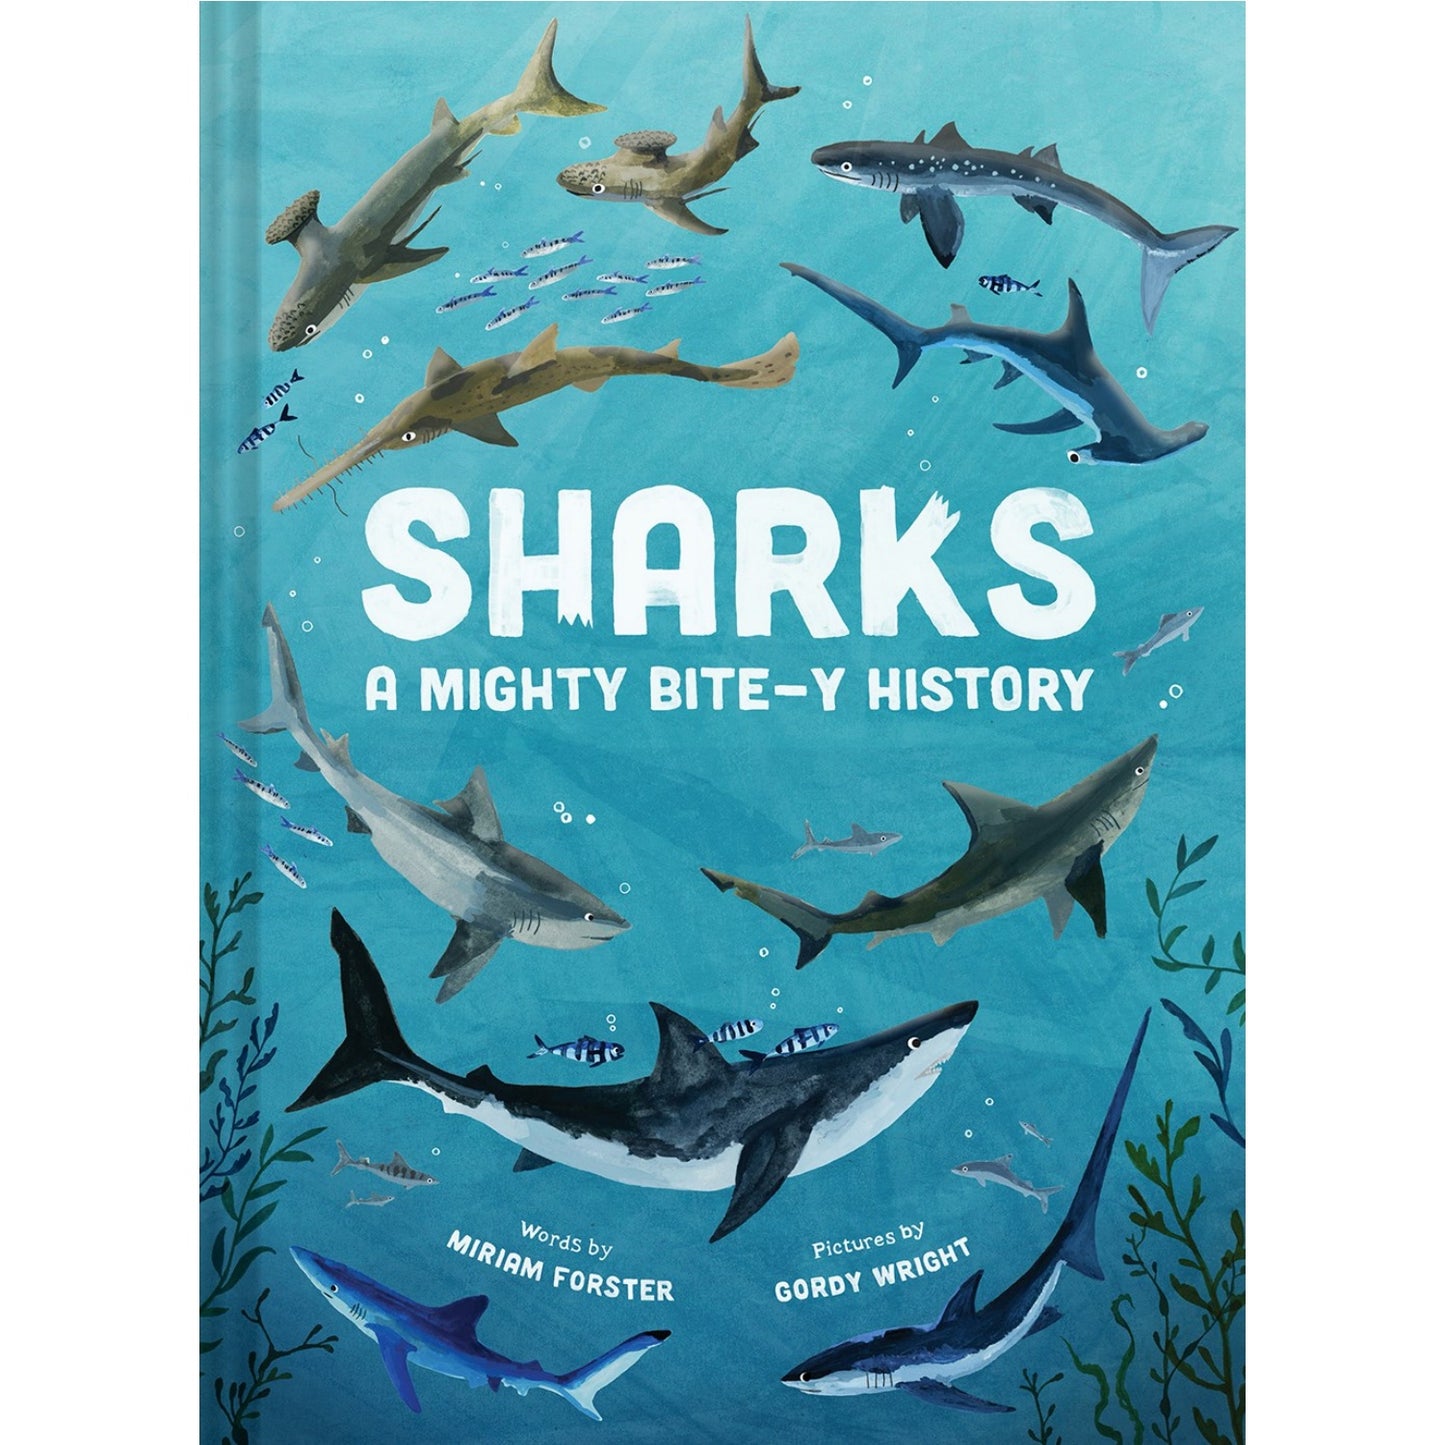 Sharks: A Mighty Bite-y History | Hardcover | Children’s Book on Nature